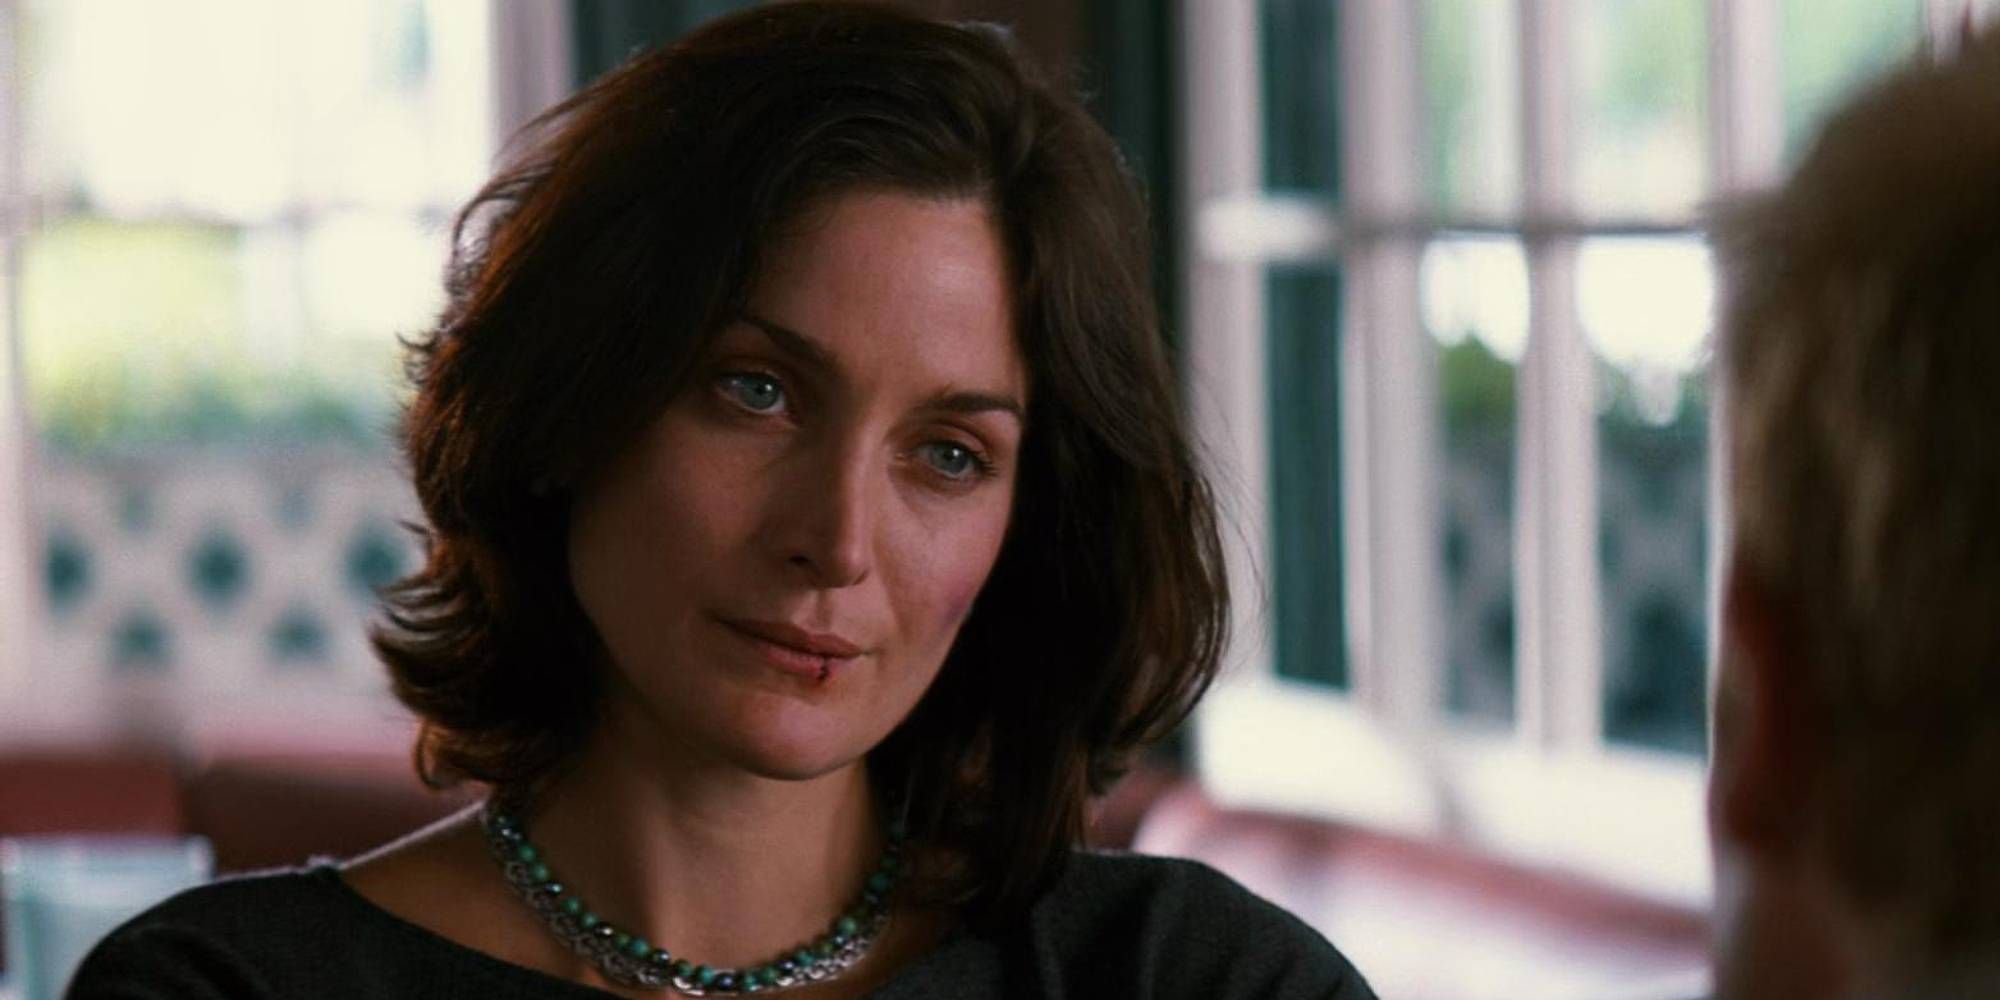 Carrie-Anne Moss in Memento as Natalie with a cut on her lip